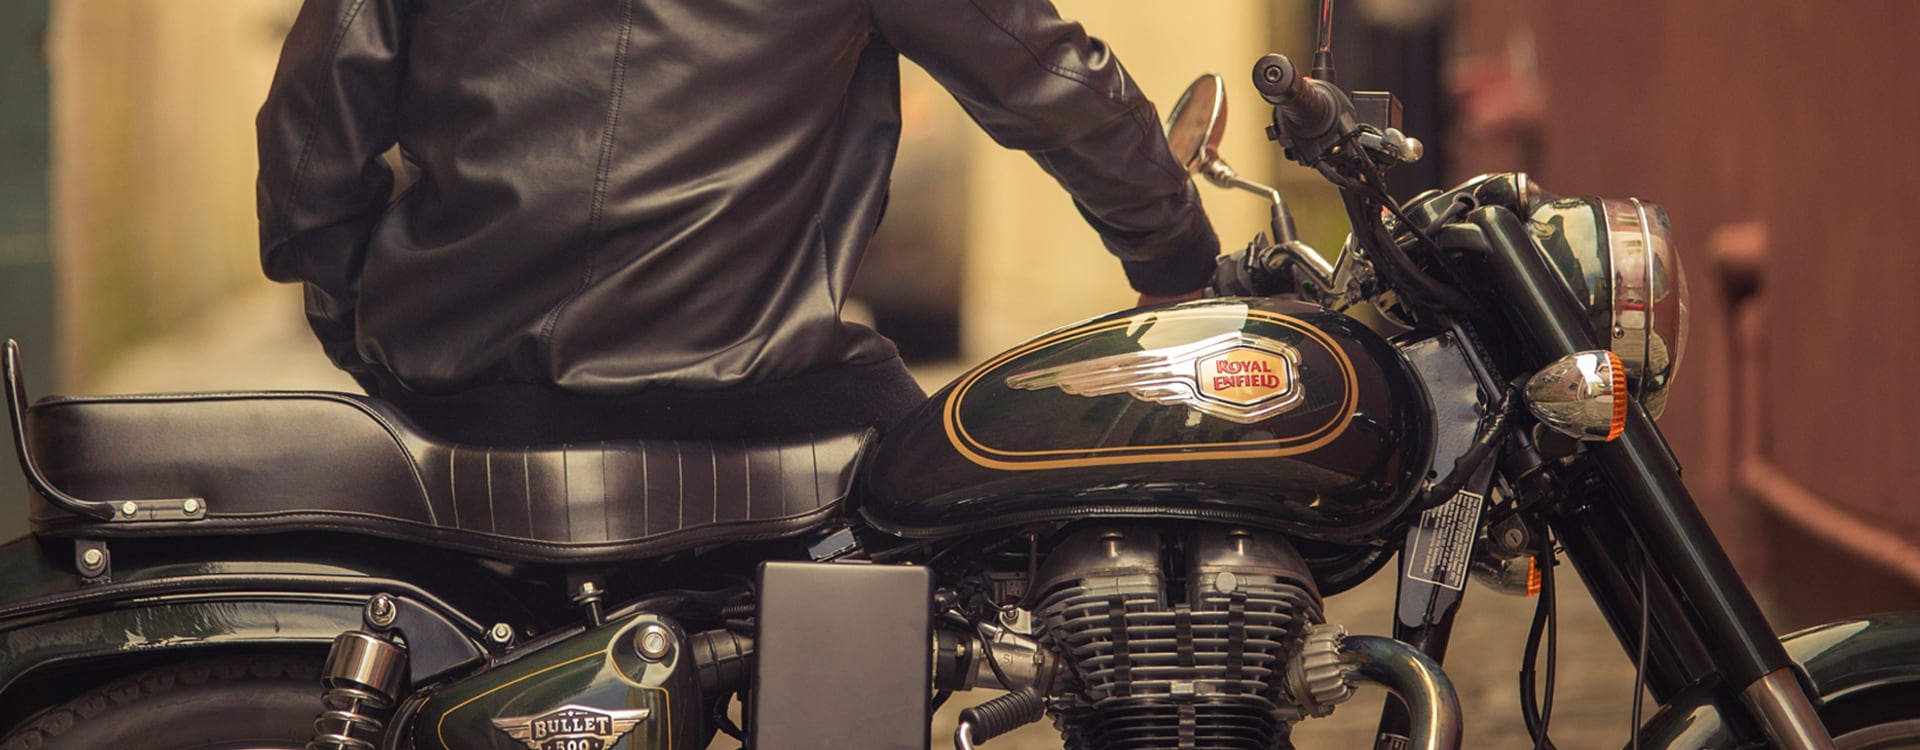 Bullet 500 - Unchanged reliability